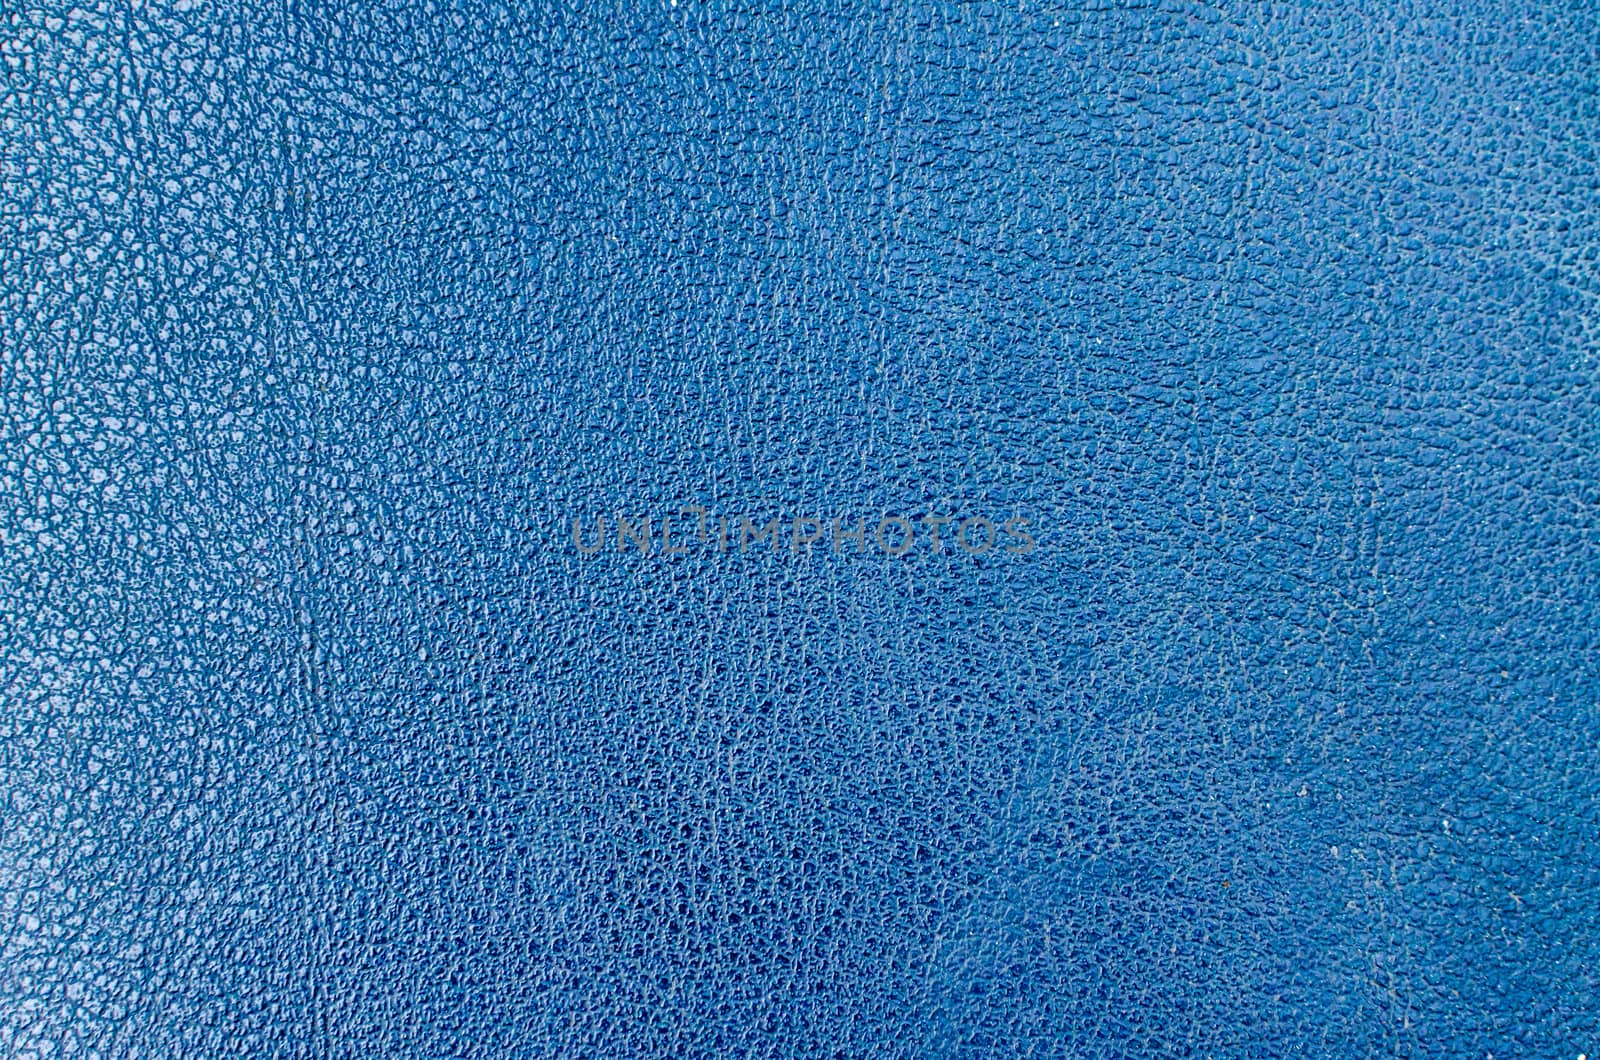 Blue leather background or texture .